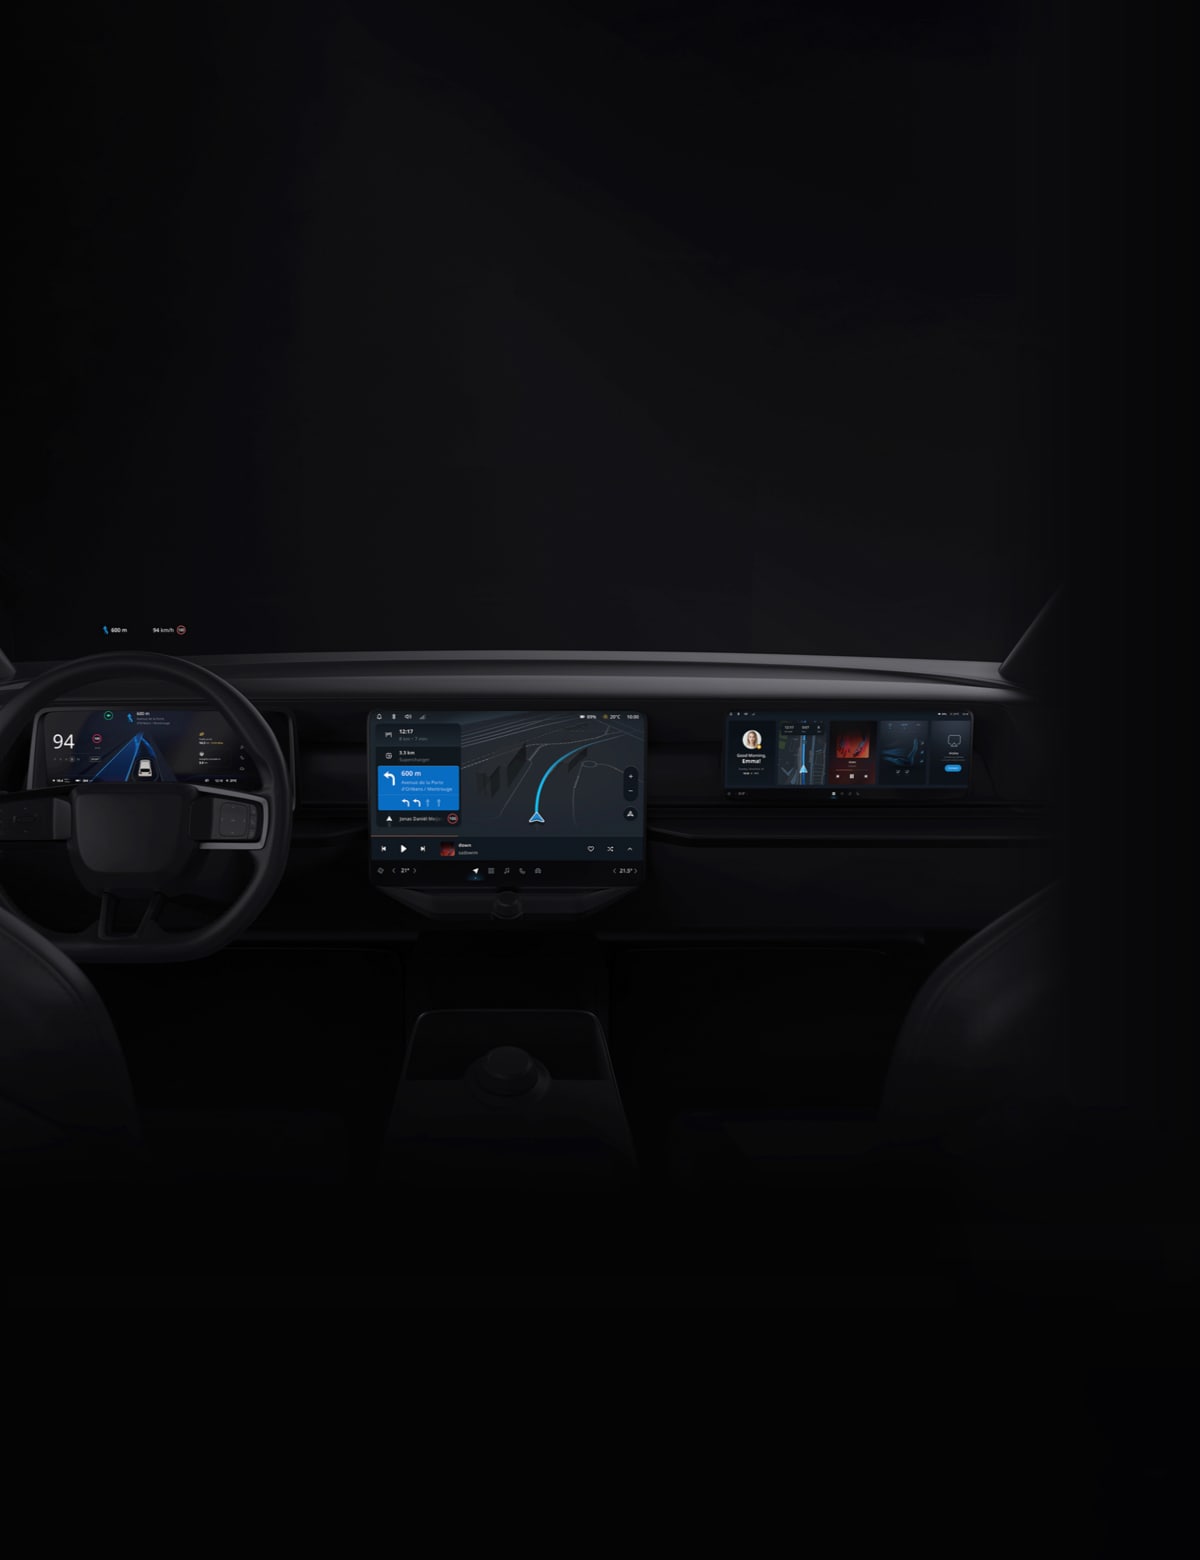 TomTom IndiGO is now ready for the world!